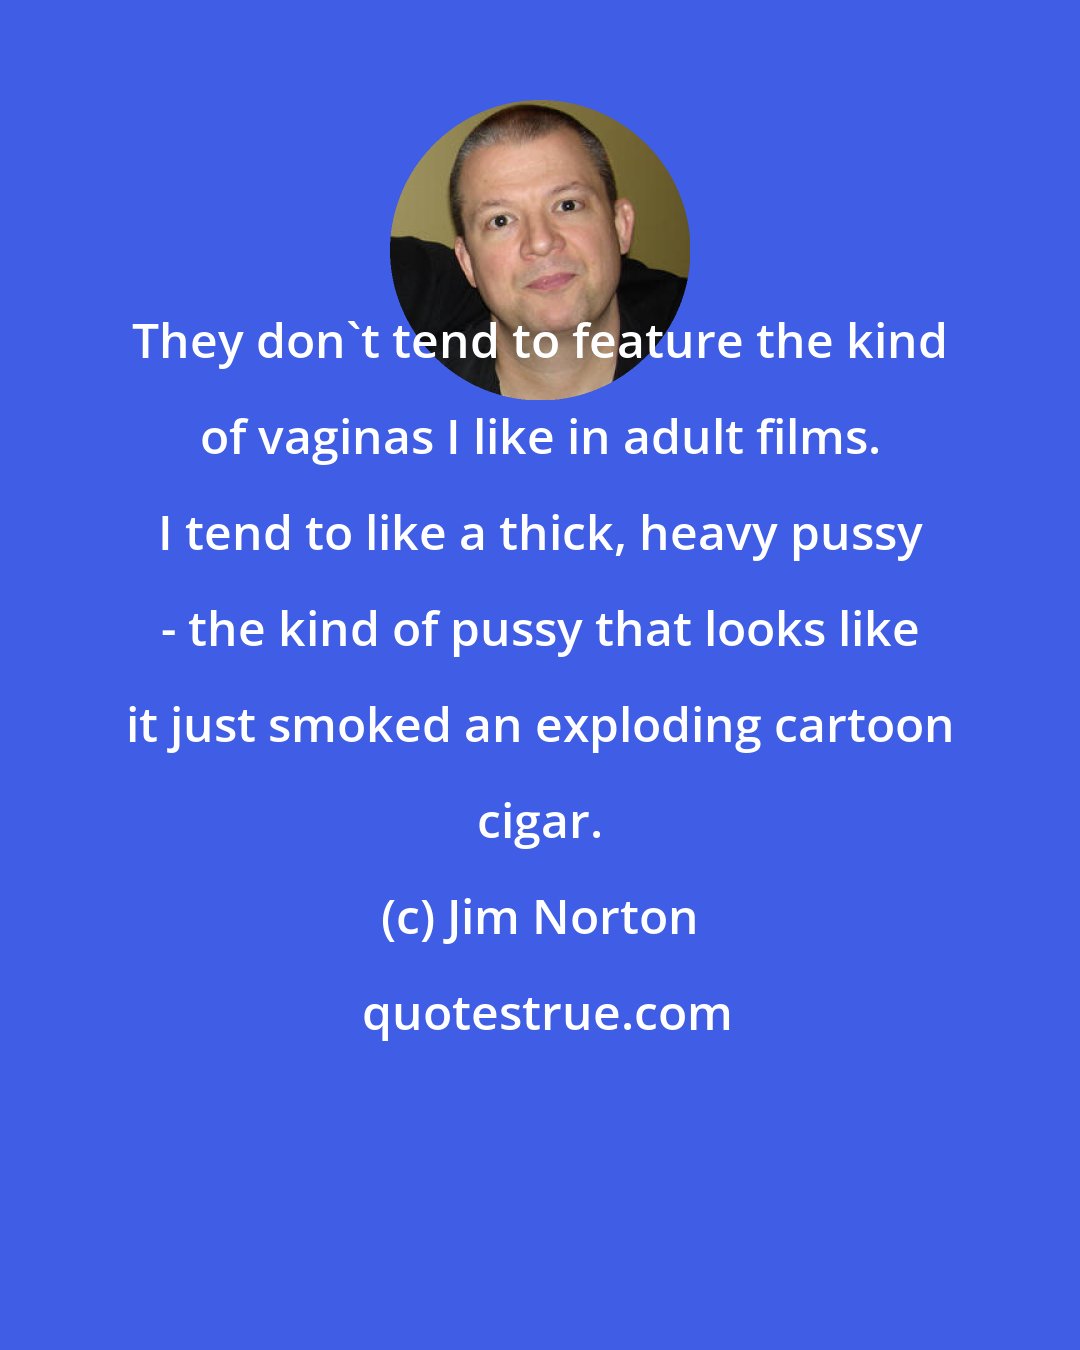 Jim Norton: They don't tend to feature the kind of vaginas I like in adult films. I tend to like a thick, heavy pussy - the kind of pussy that looks like it just smoked an exploding cartoon cigar.